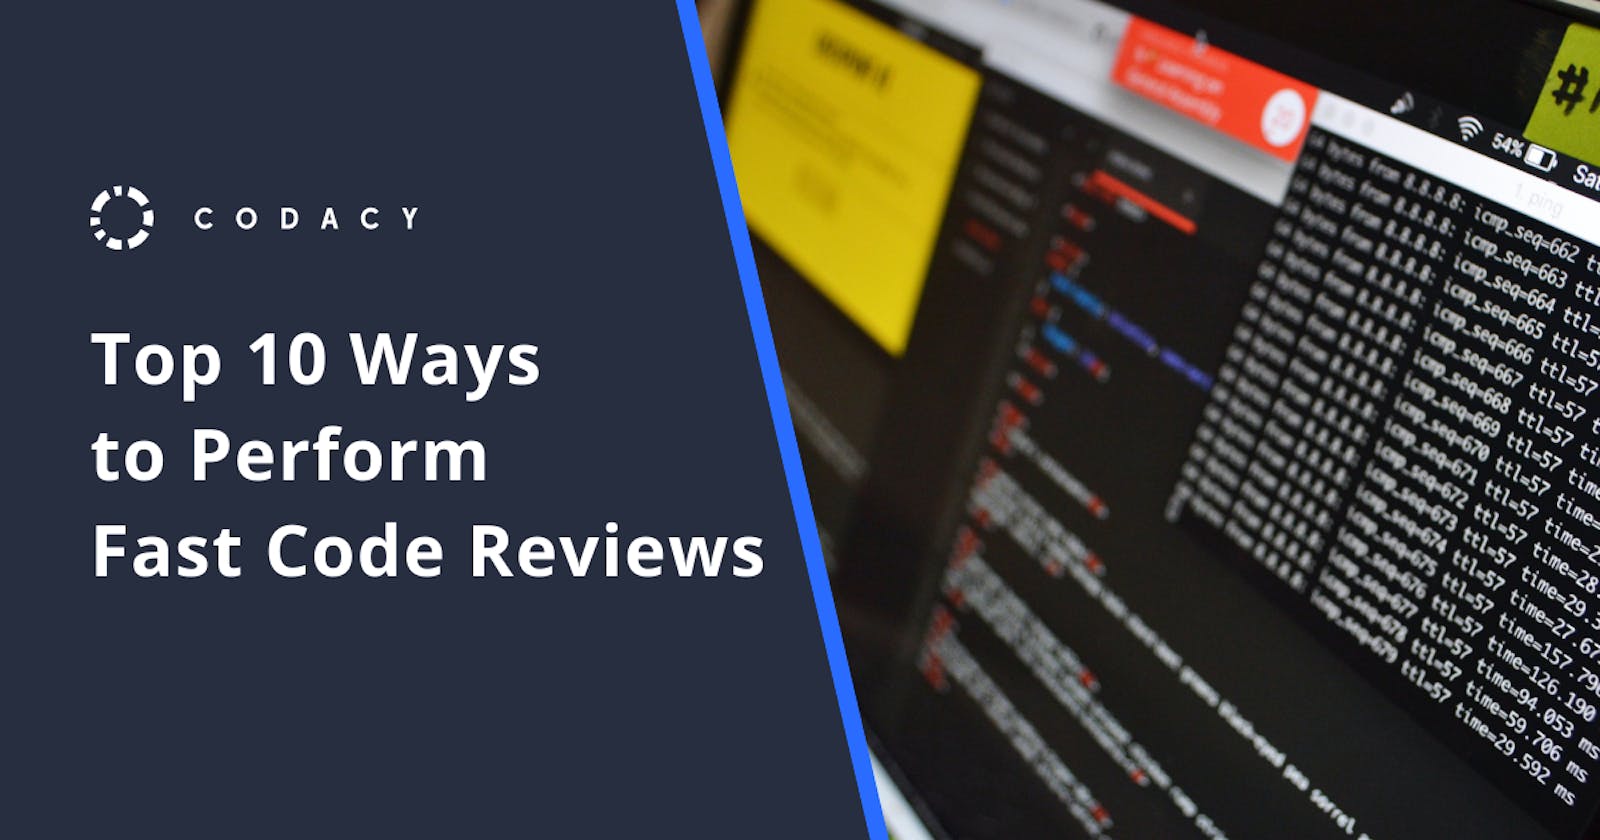 Top 10 ways to perform fast code reviews